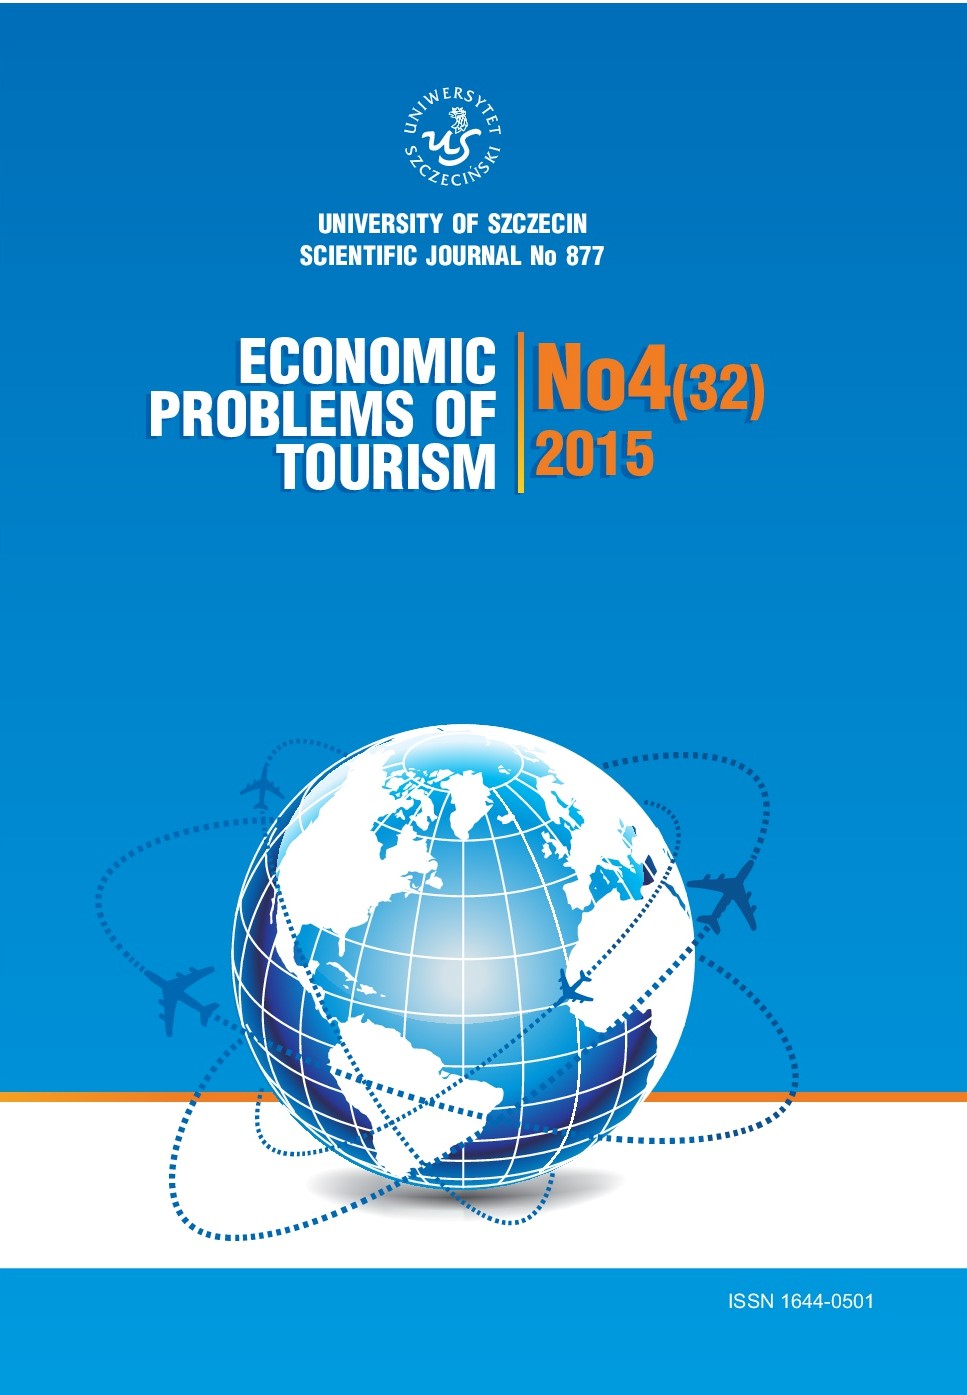 The Concept of the Tourism Enterprise Innovation Analysis Cover Image